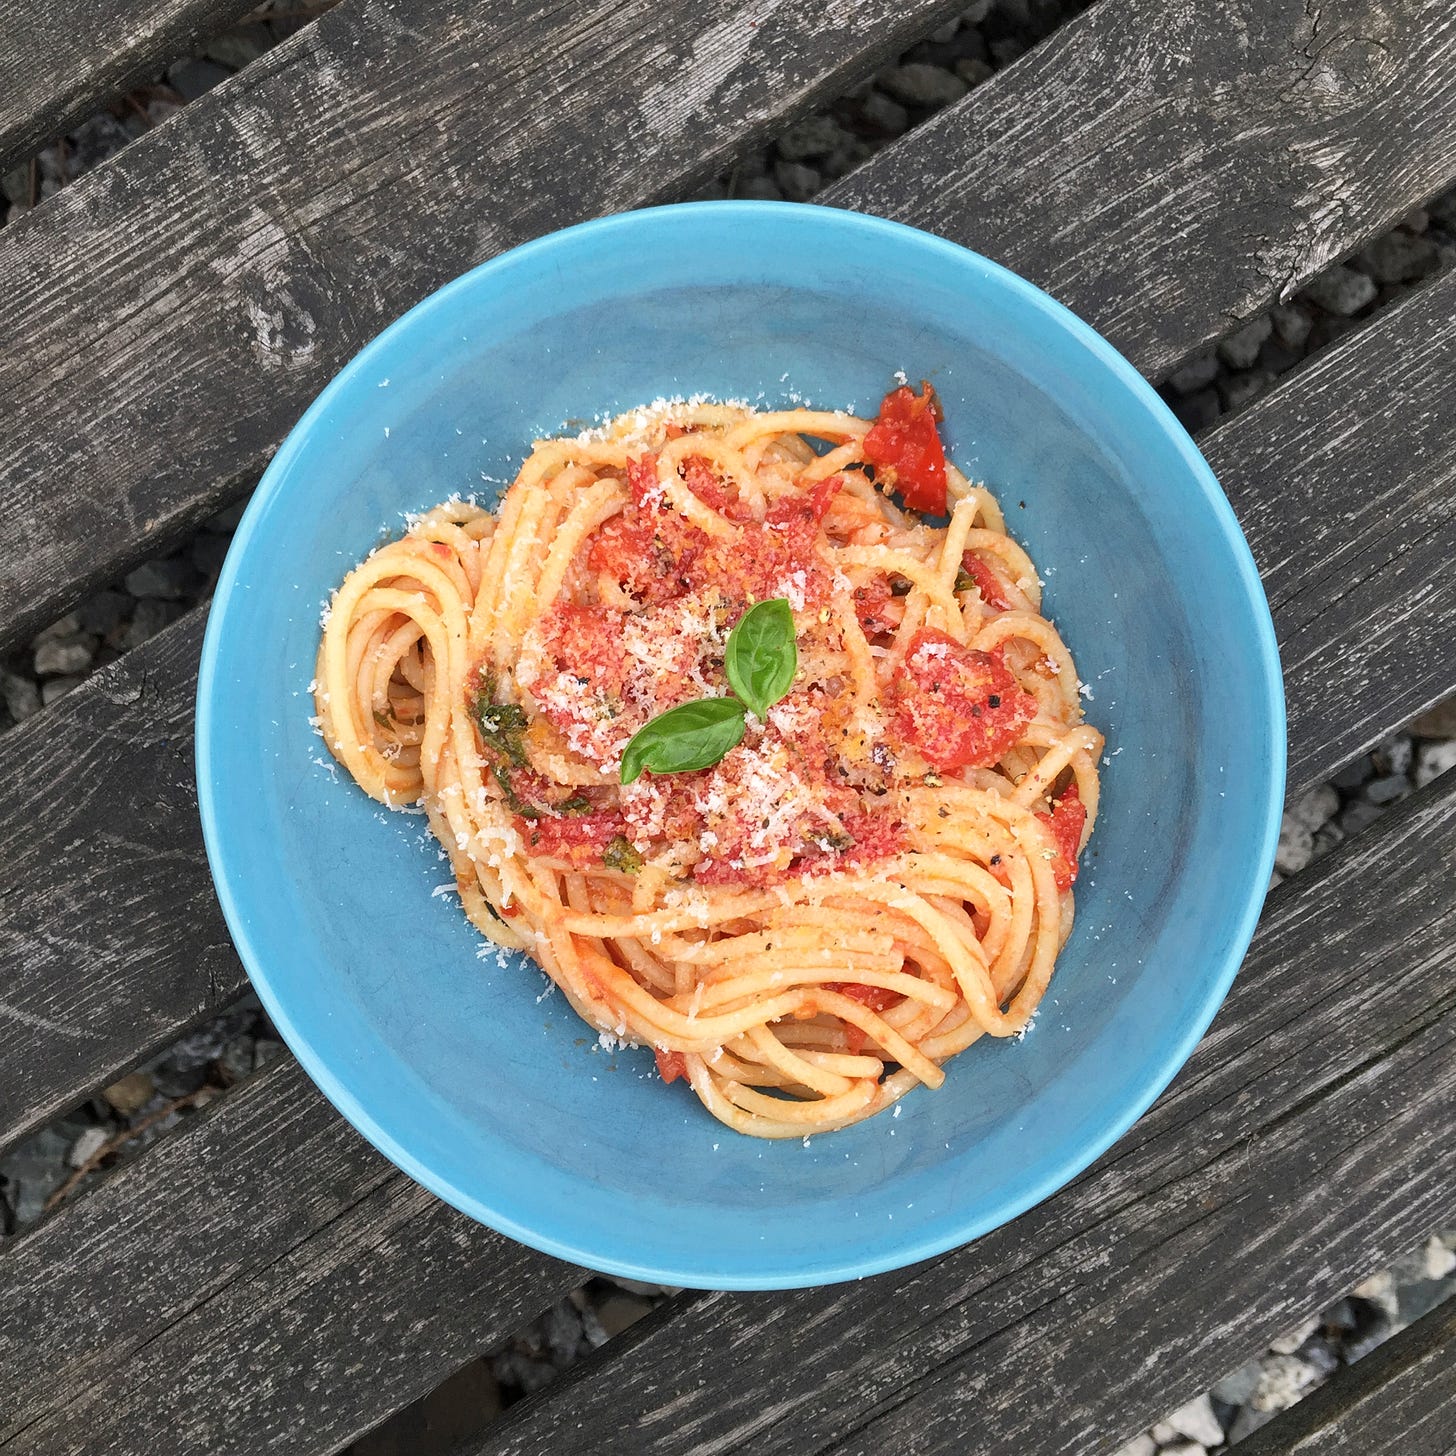 On a wooden bench, a blue bowl of spaghetti with pomodoro sauce, with parmesan and two small basil leaves on top.